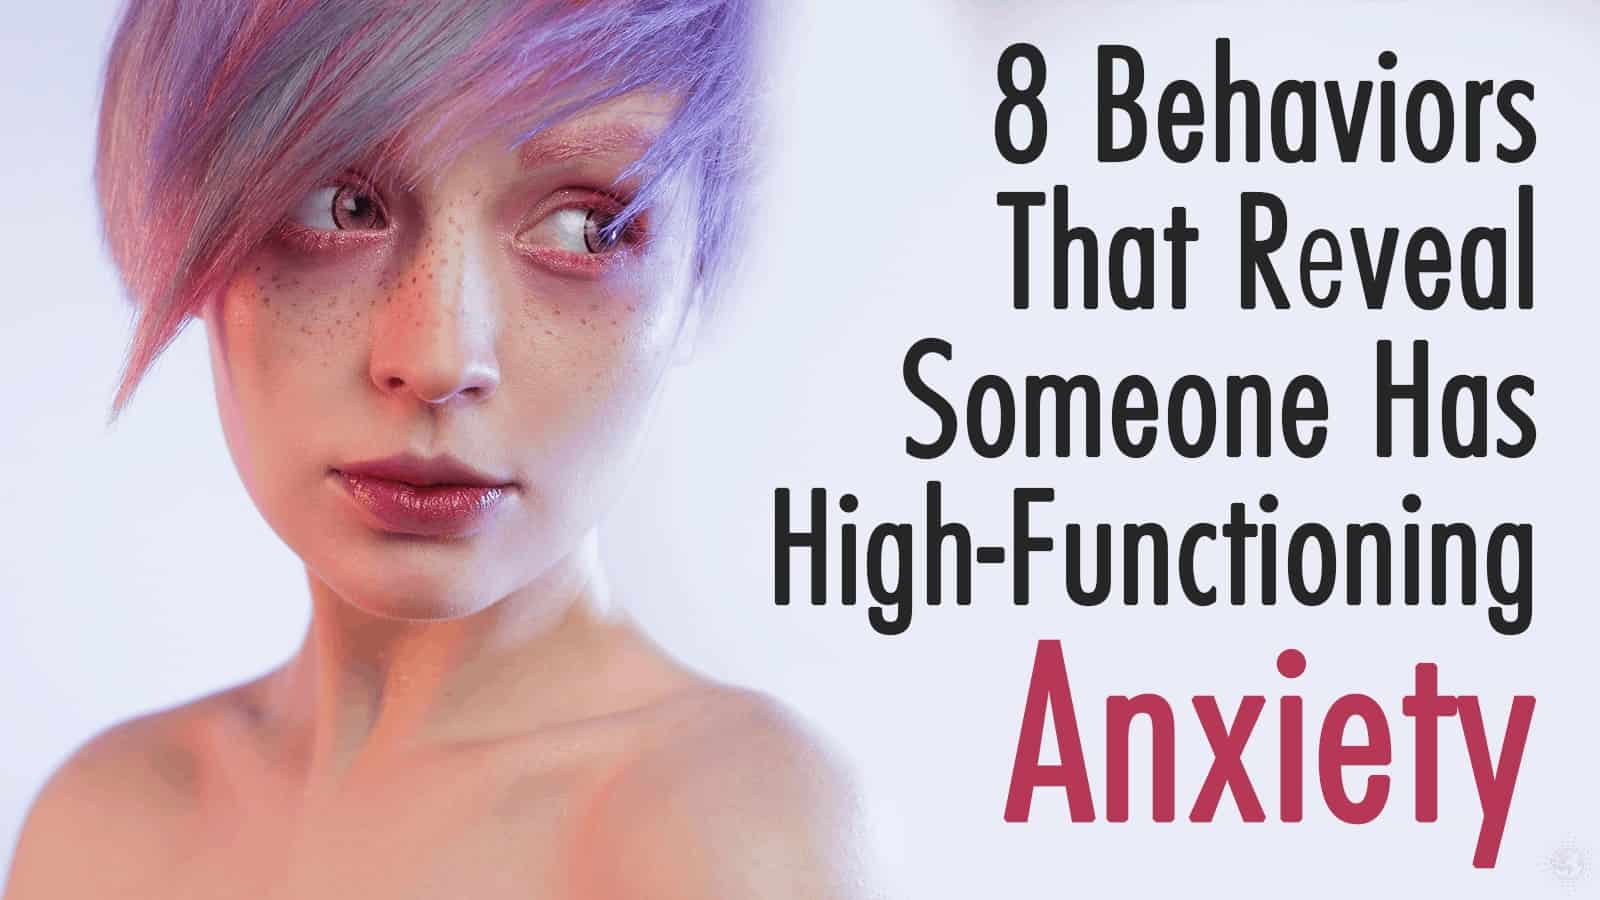 8 Behaviors That Reveal Someone Has High-Functioning Anxiety